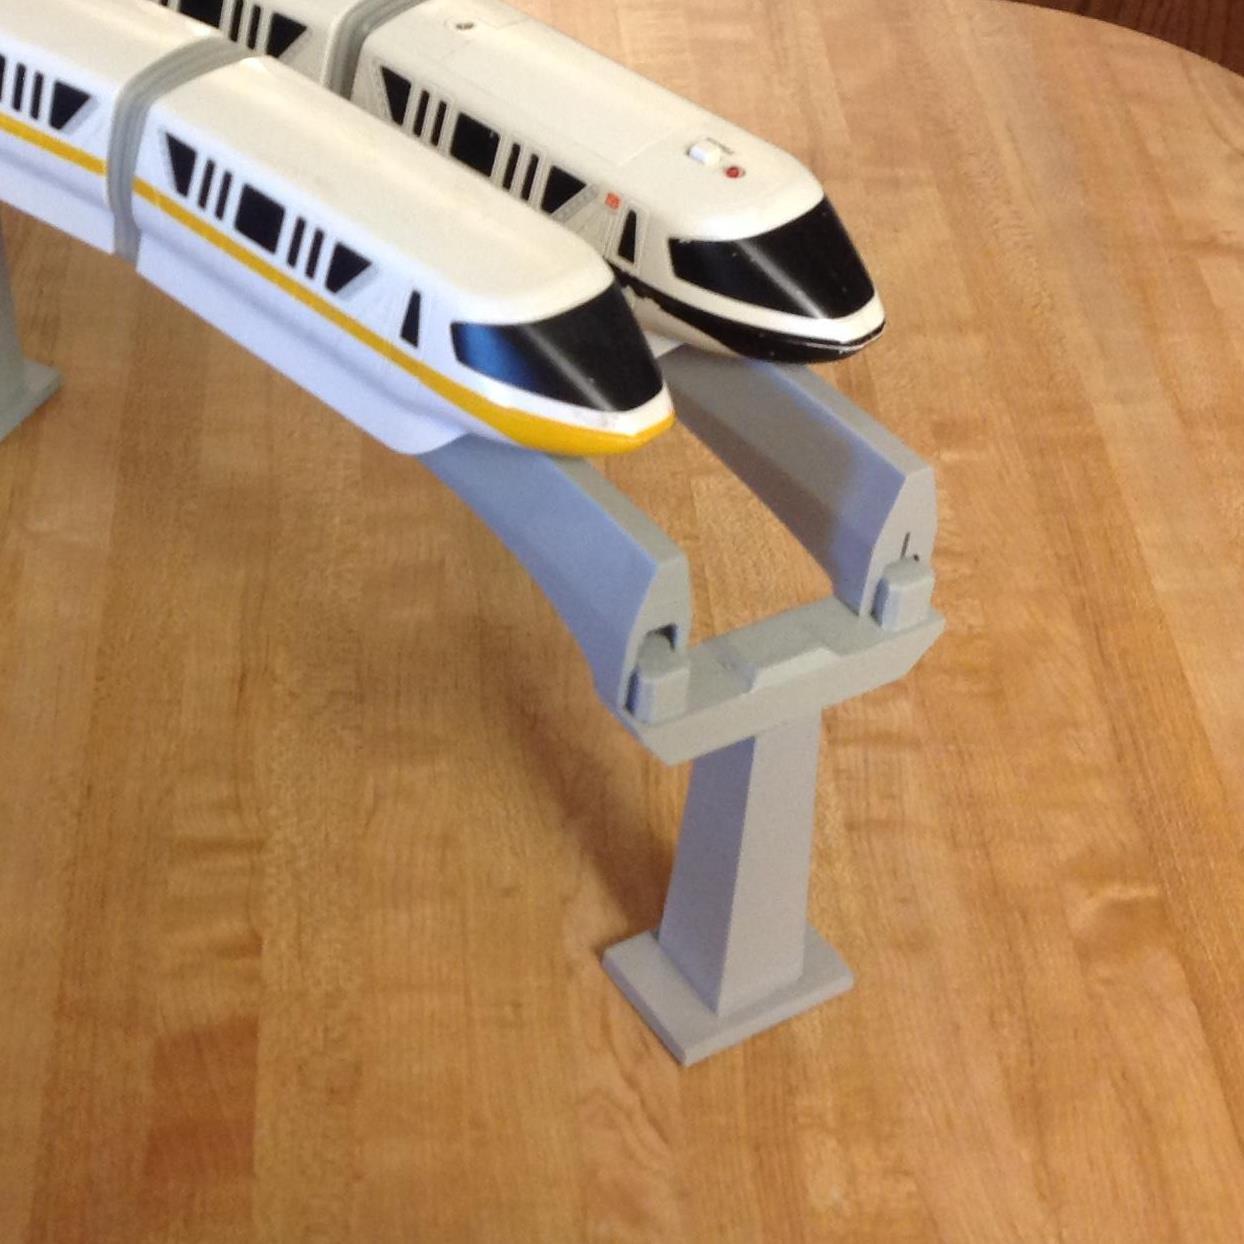 Double Track adapter for Disney Monorail Set Allows two tracks on one support